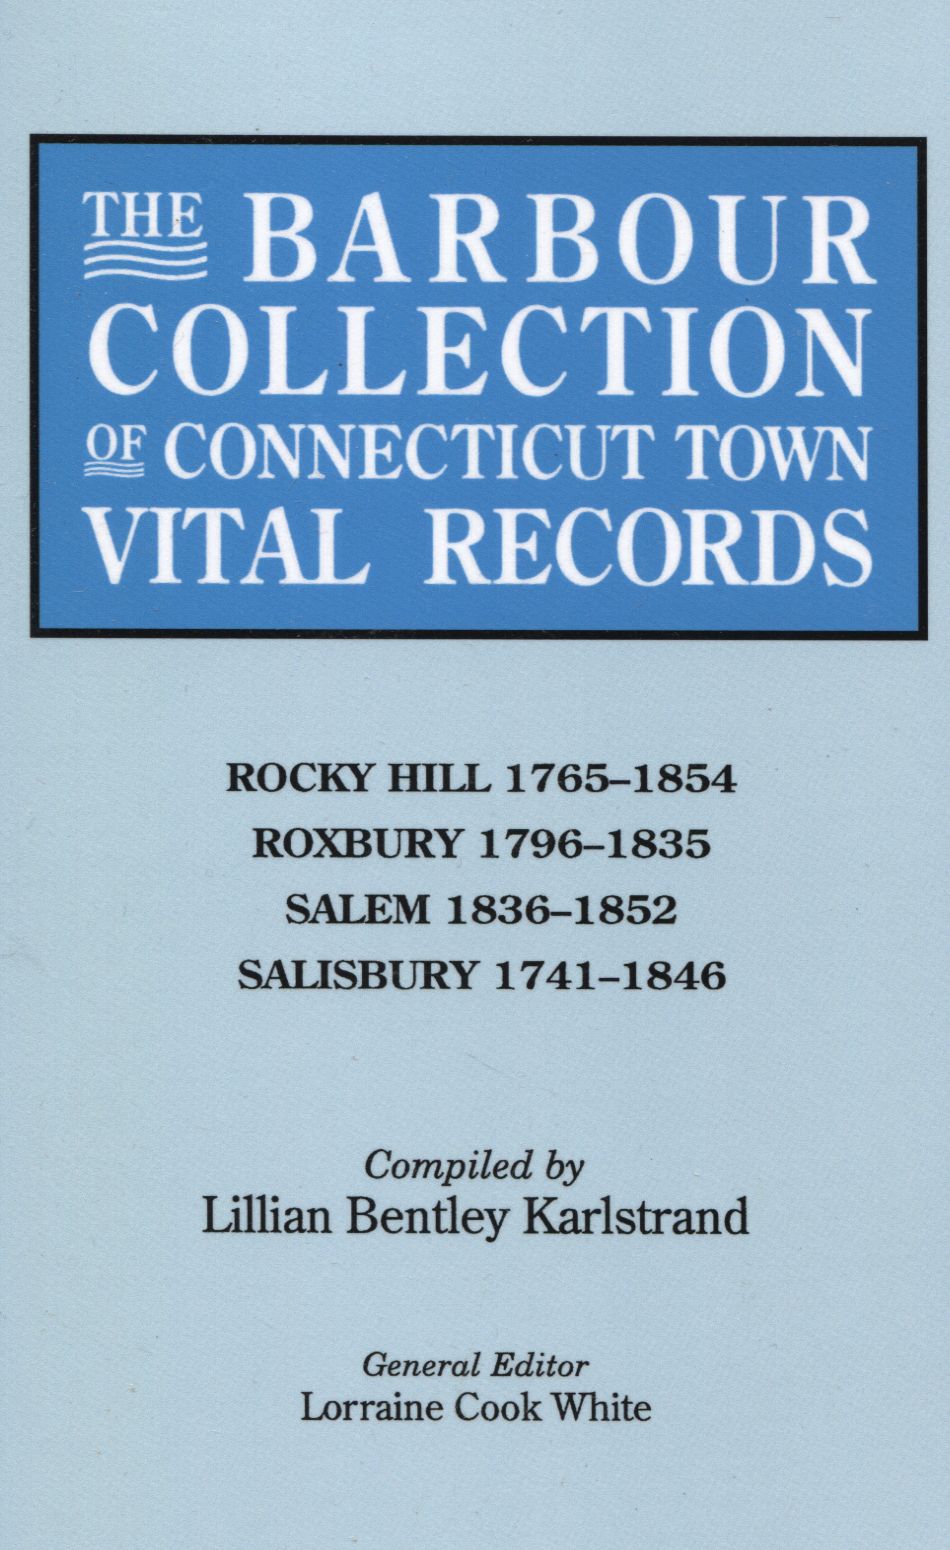 The Barbour Collection of Connecticut Town Vital Records [Vol. 37]